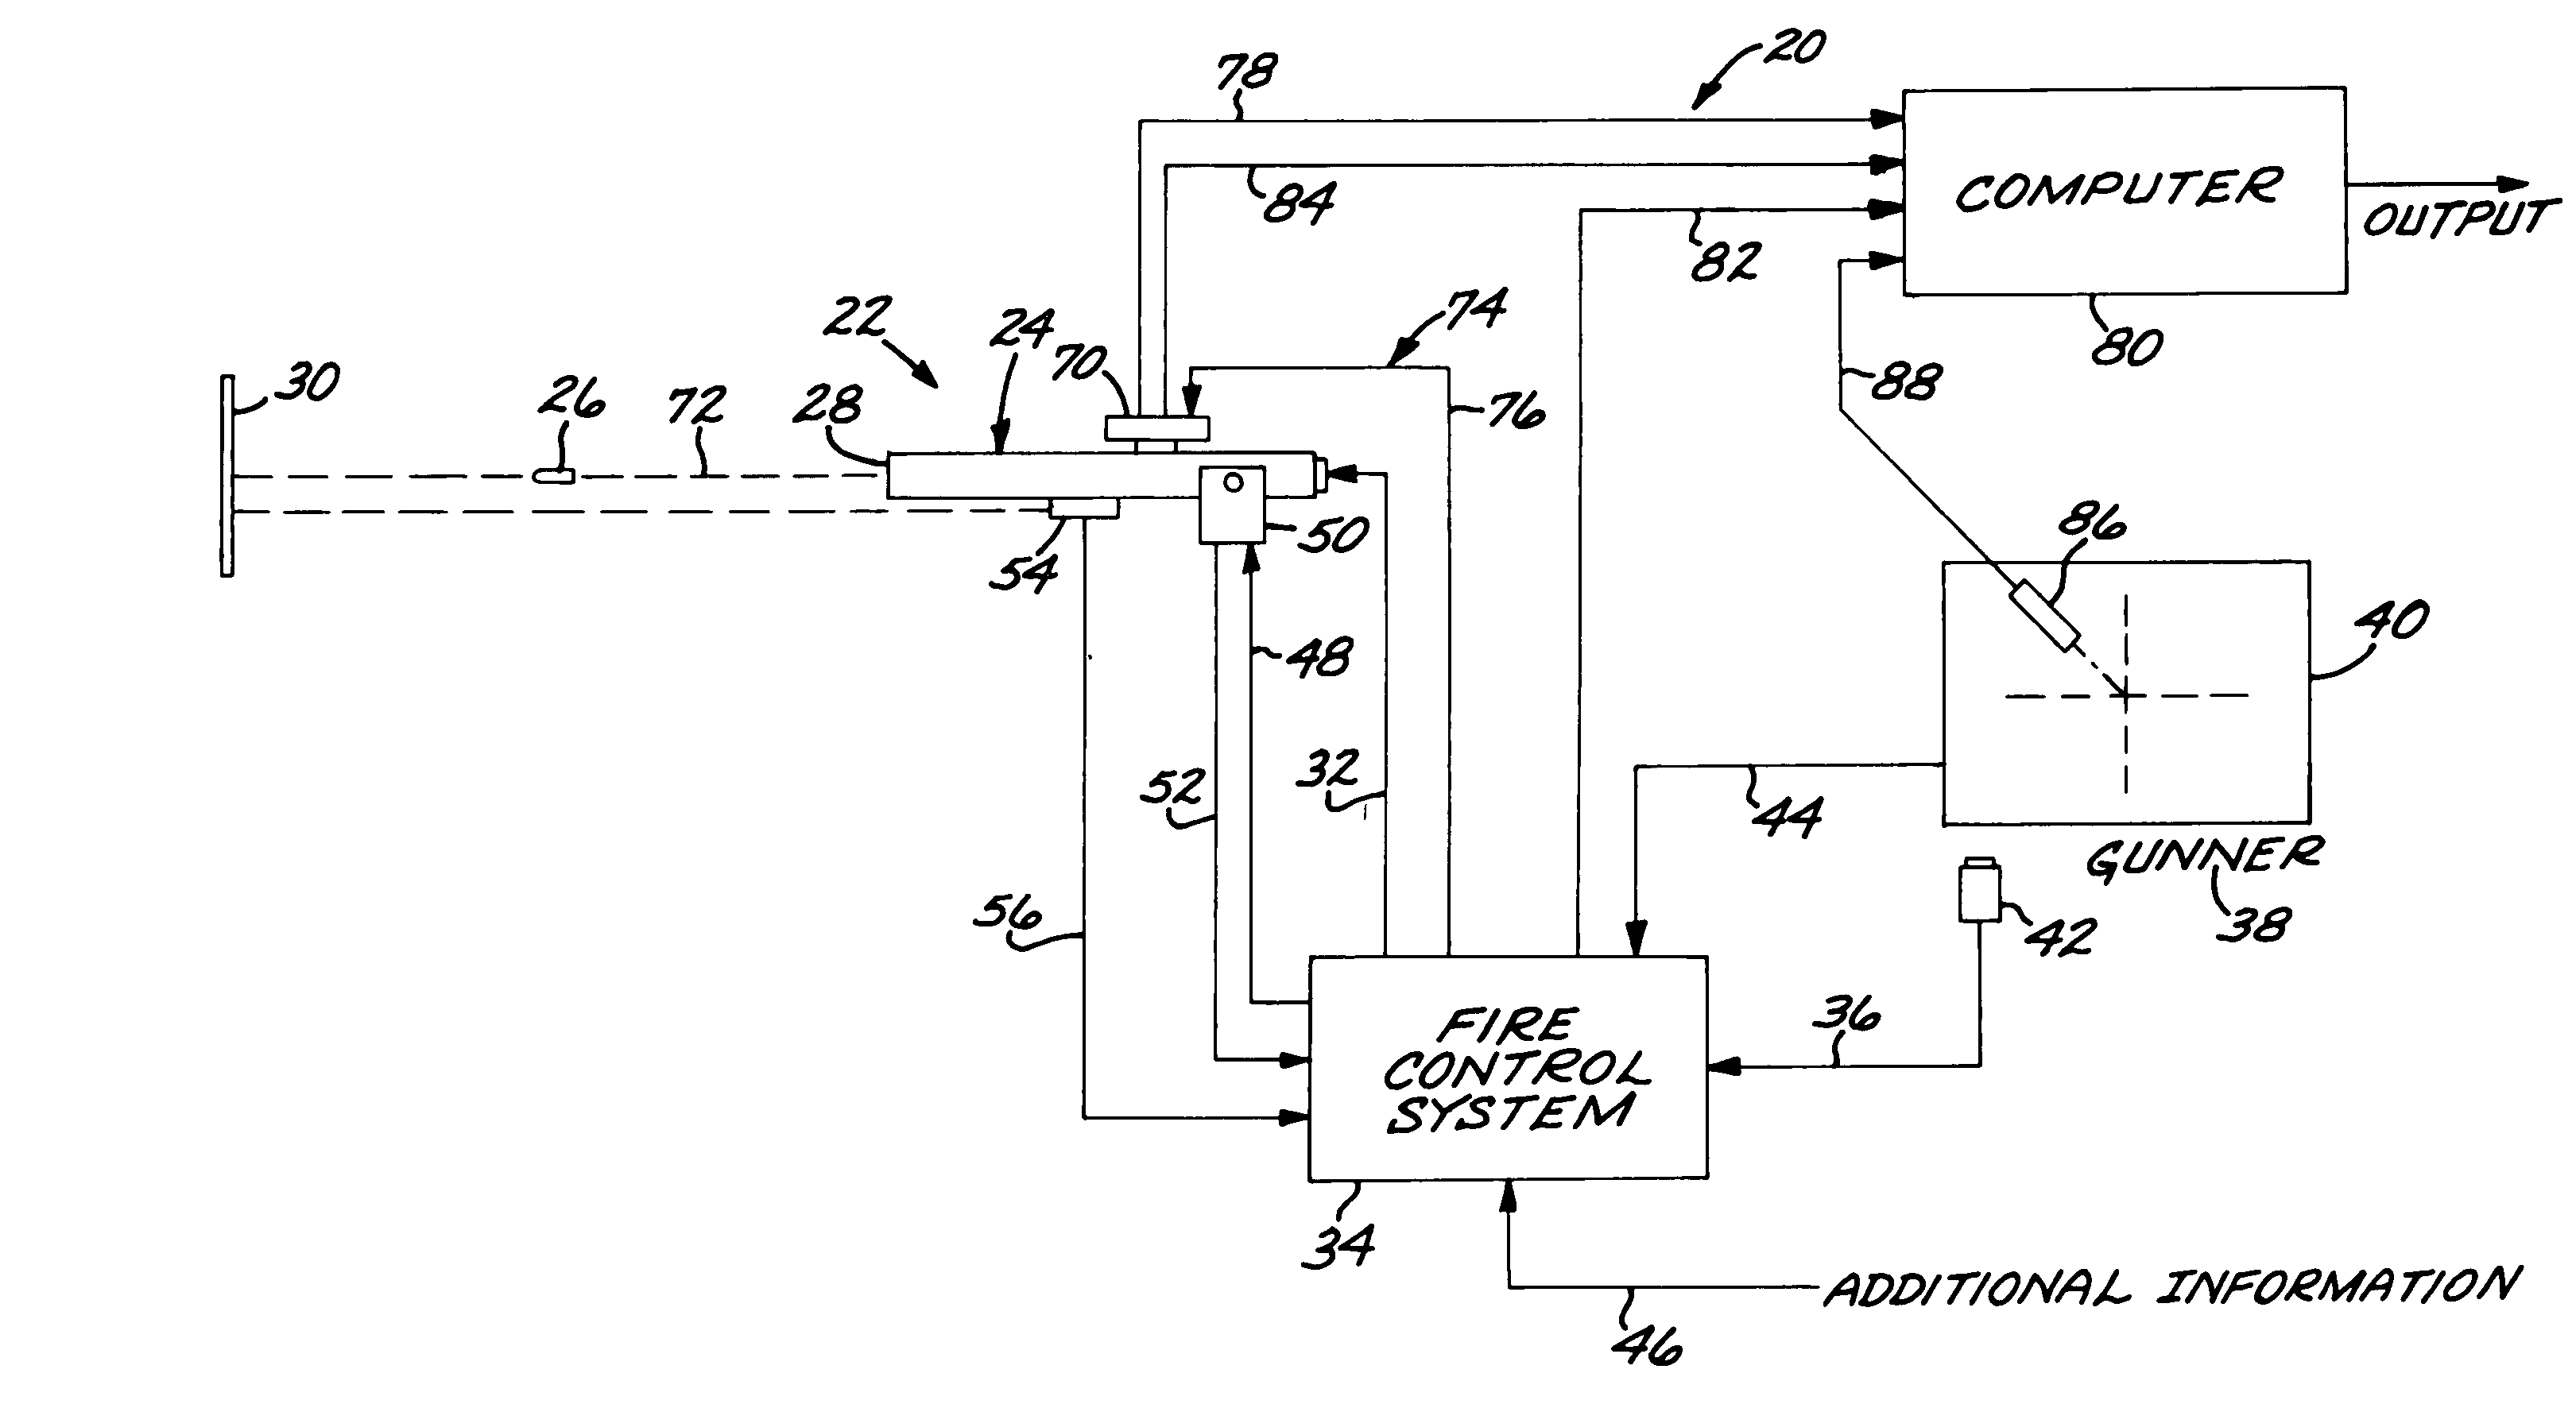 Dynamic pointing accuracy evaluation system and method used with a gun that fires a projectile under control of an automated fire control system